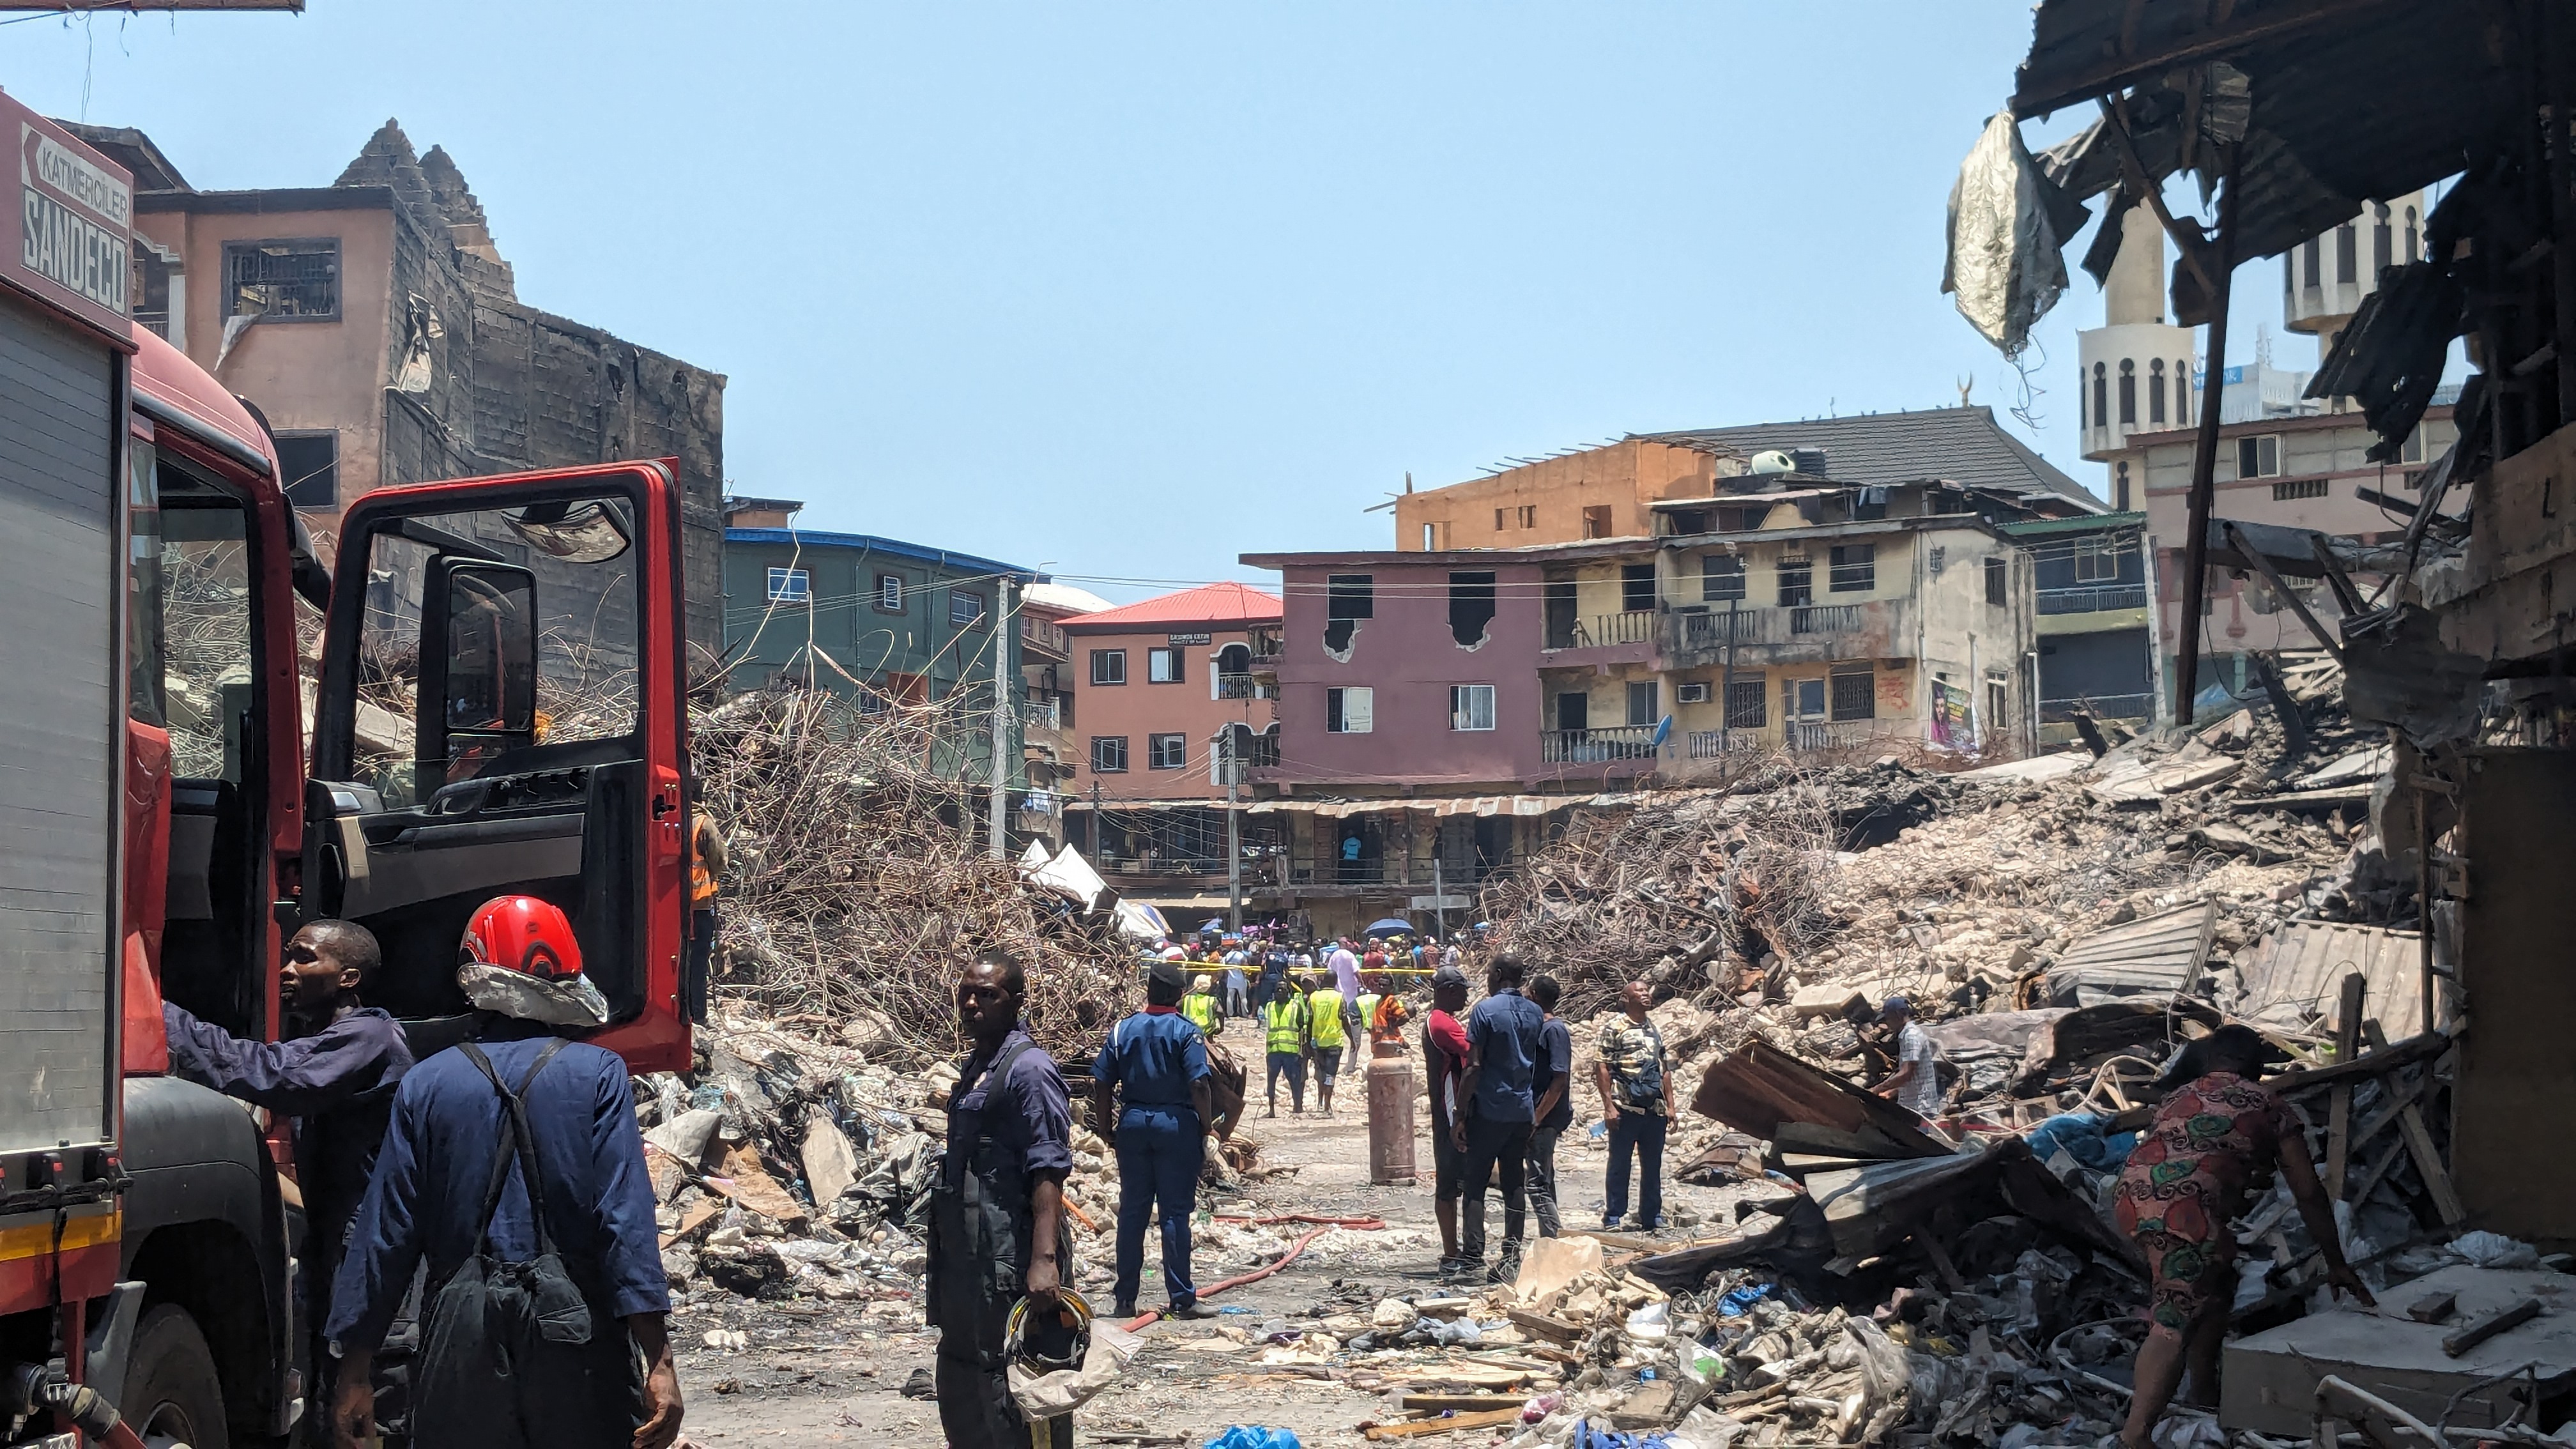 EYEWITNESS: Dosunmu Market Fire, Which Destroyed Goods Worth 'Trillions of Naira', Was Started by a Generator